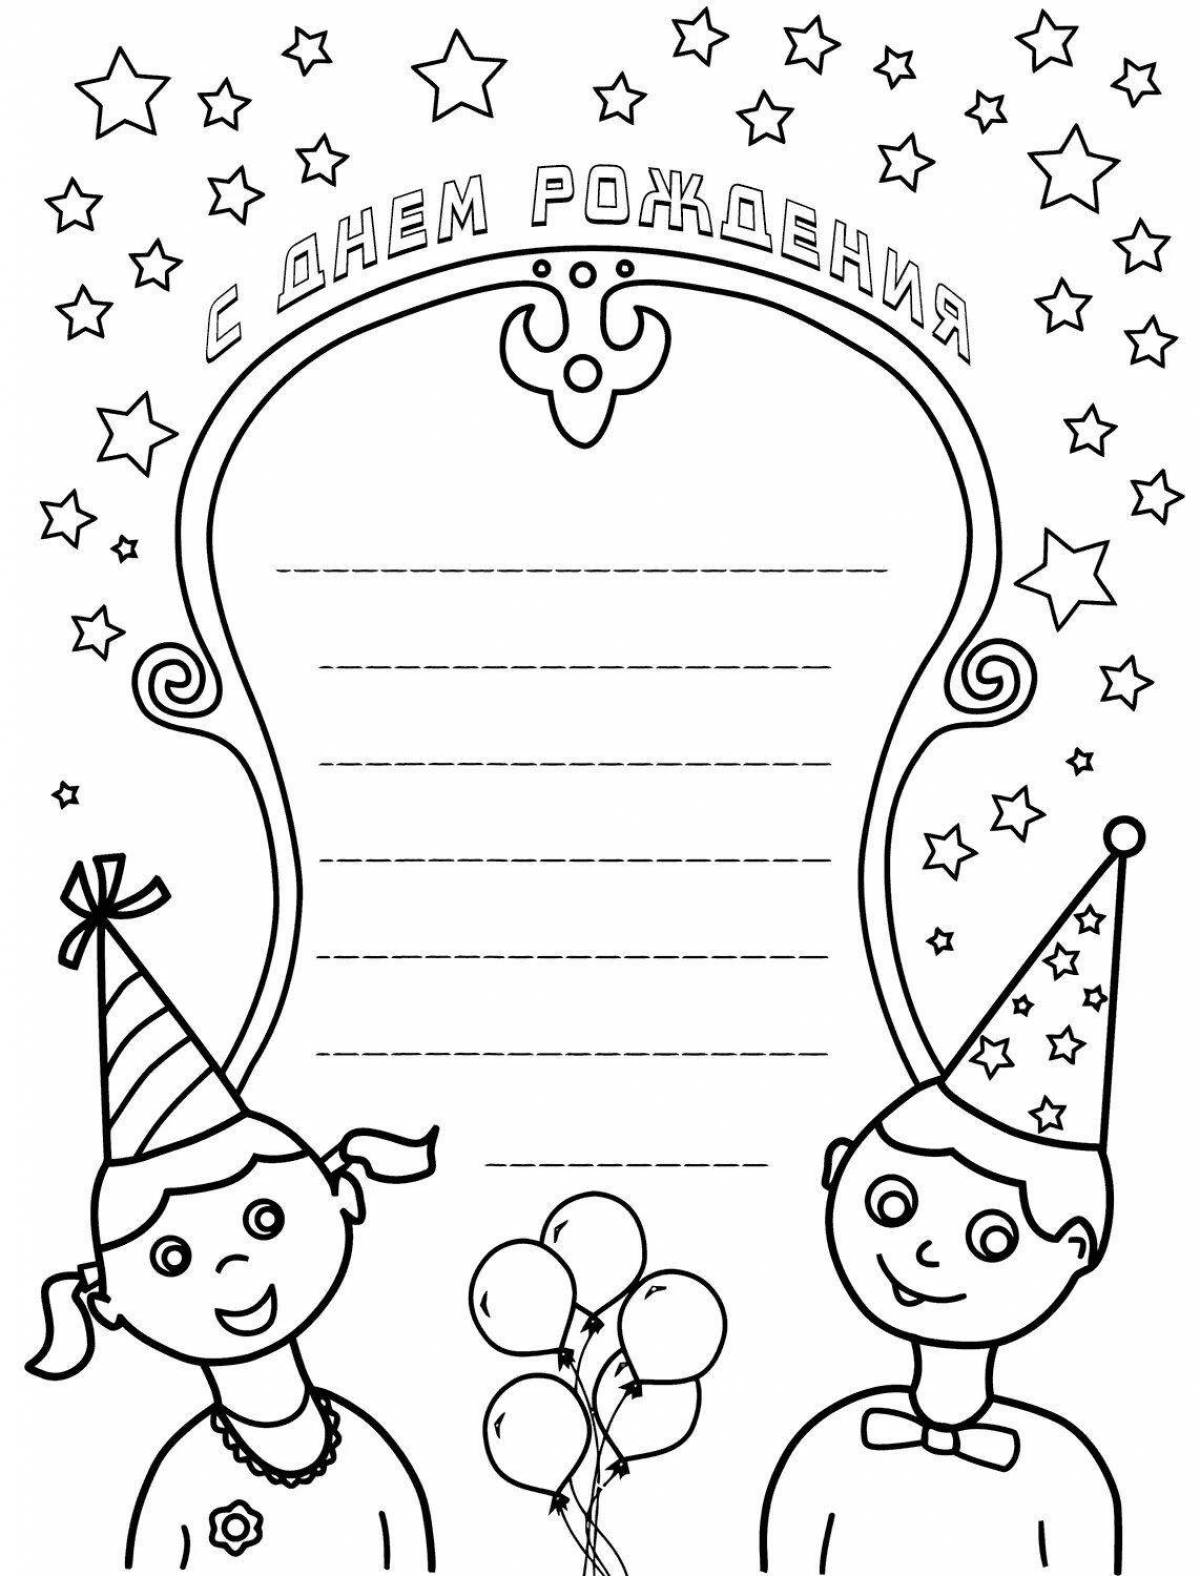 Colorful happy birthday coloring page